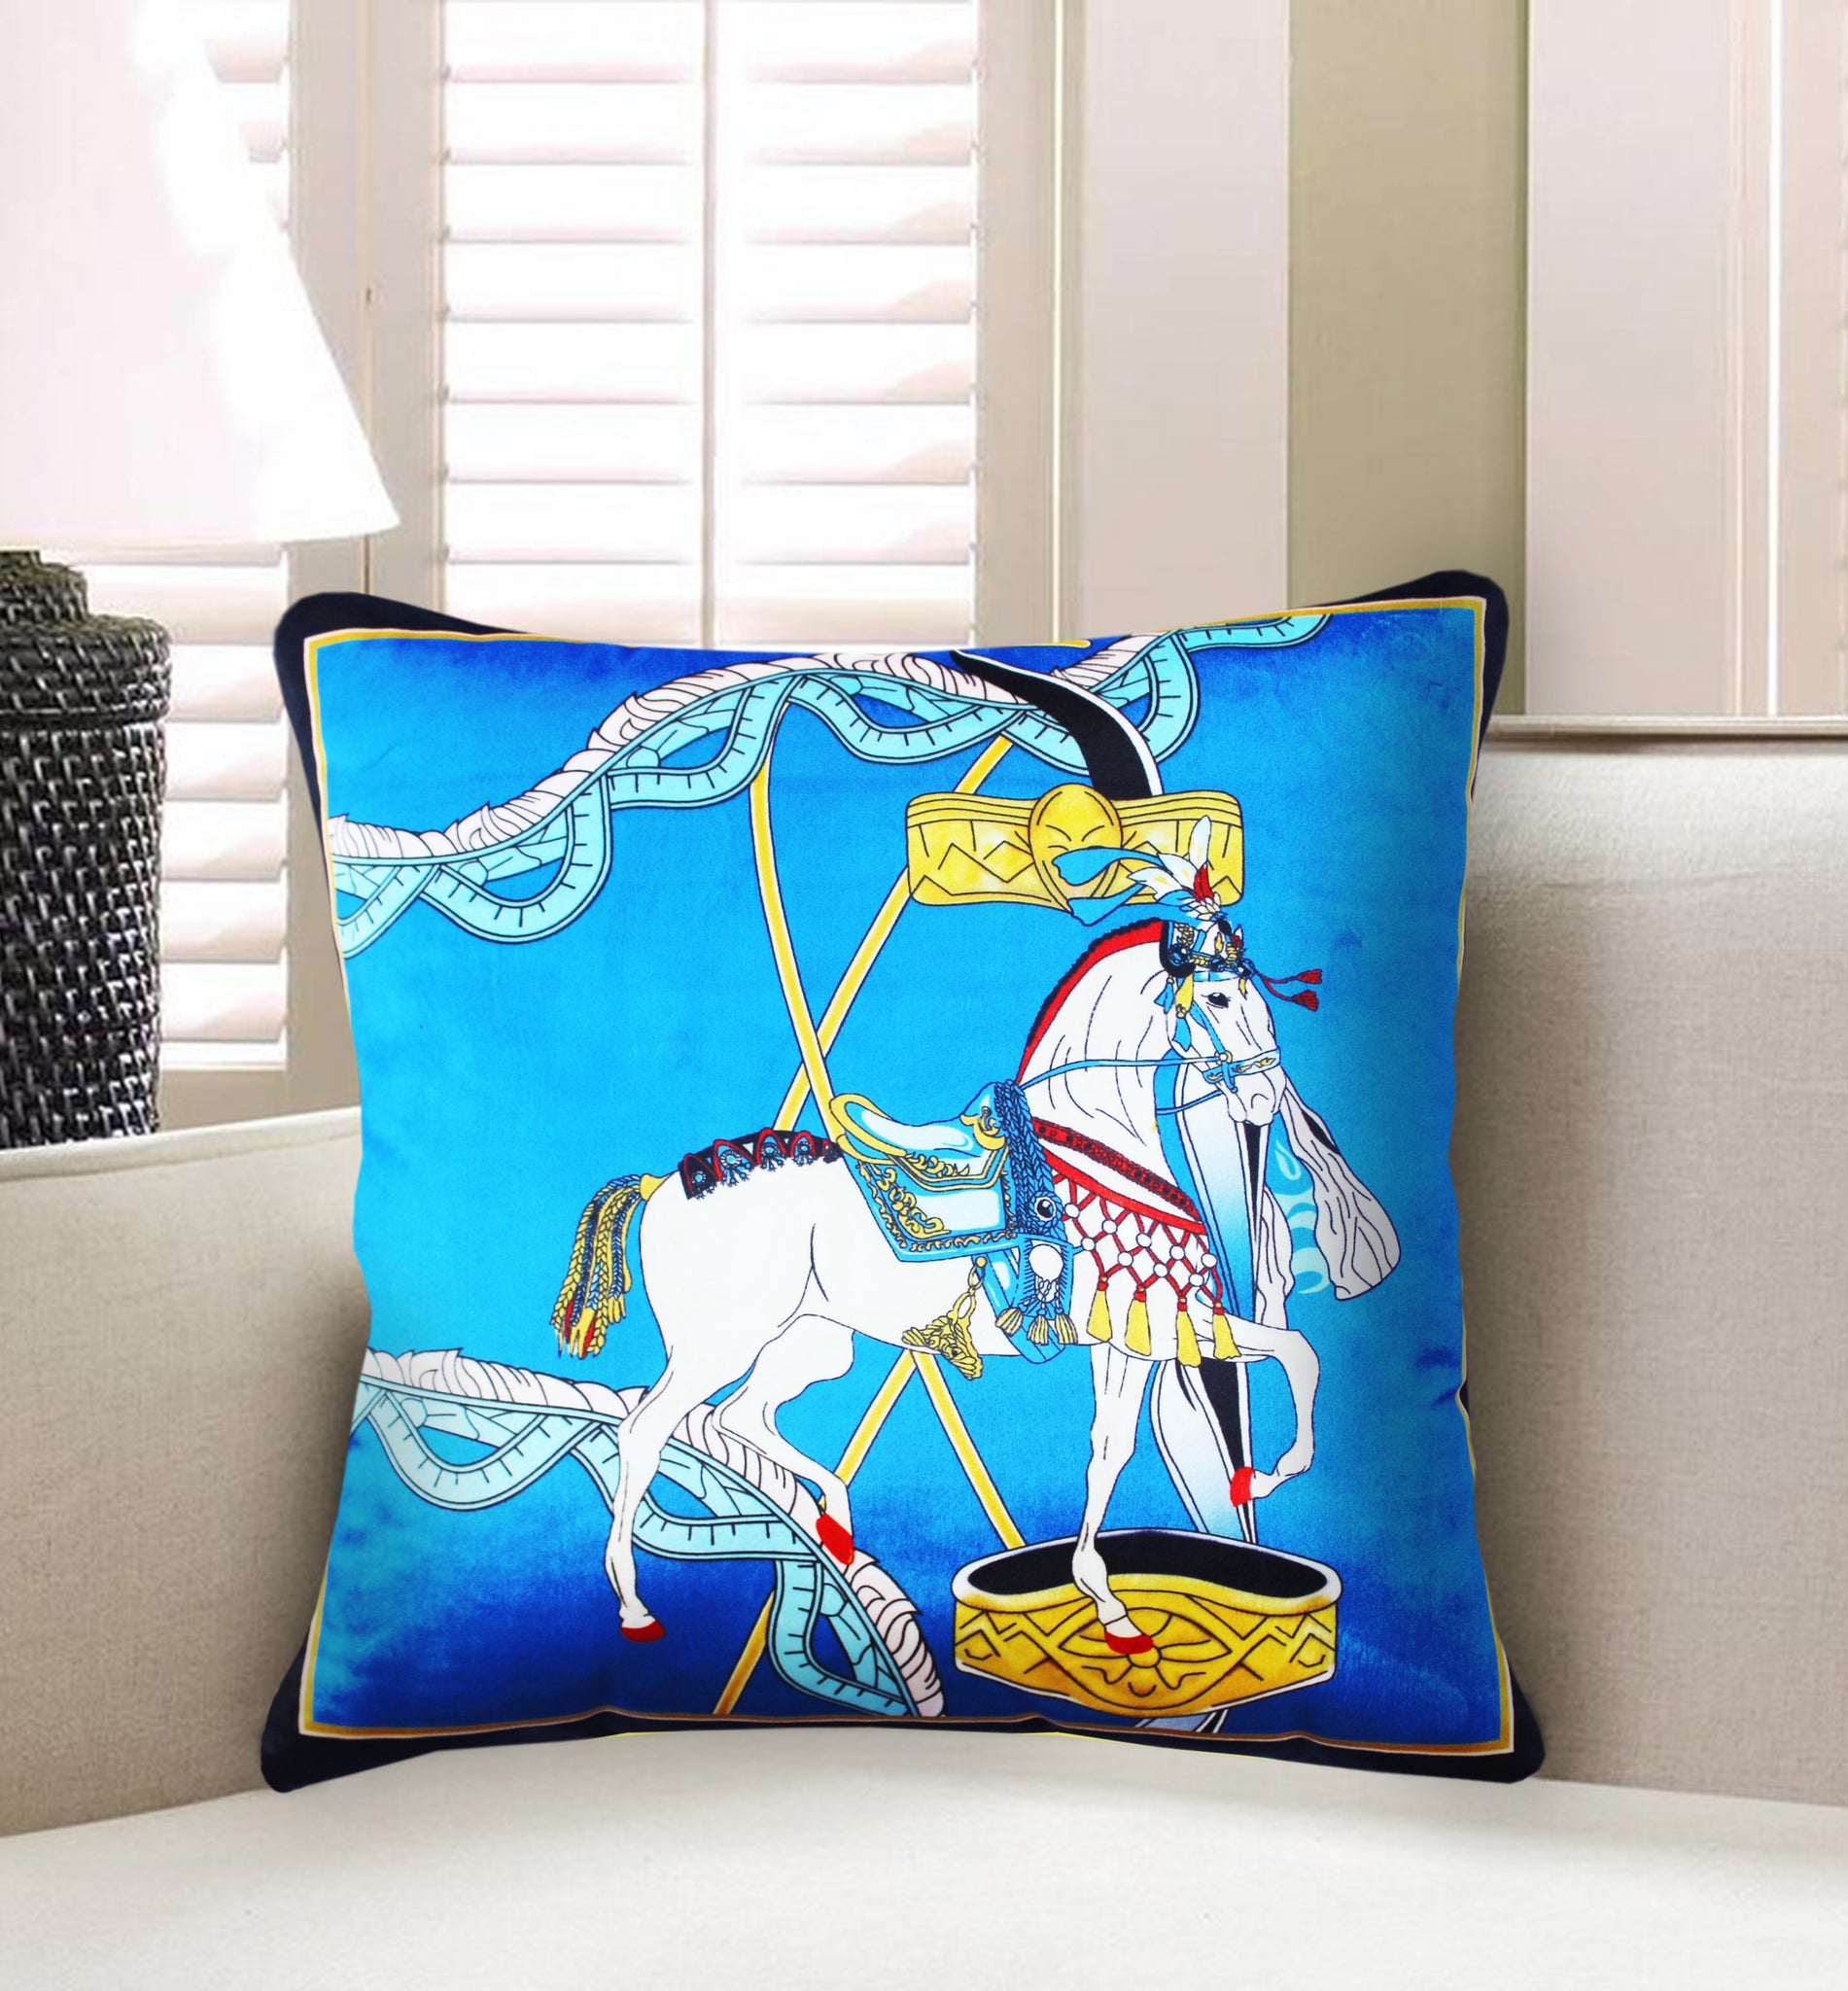 Blue Velvet Cushion Cover, Hermes Inspired Horse Printed Decorative Pillow, Vintage Home Décor Throw Pillow Cover,  45 x 45 CM